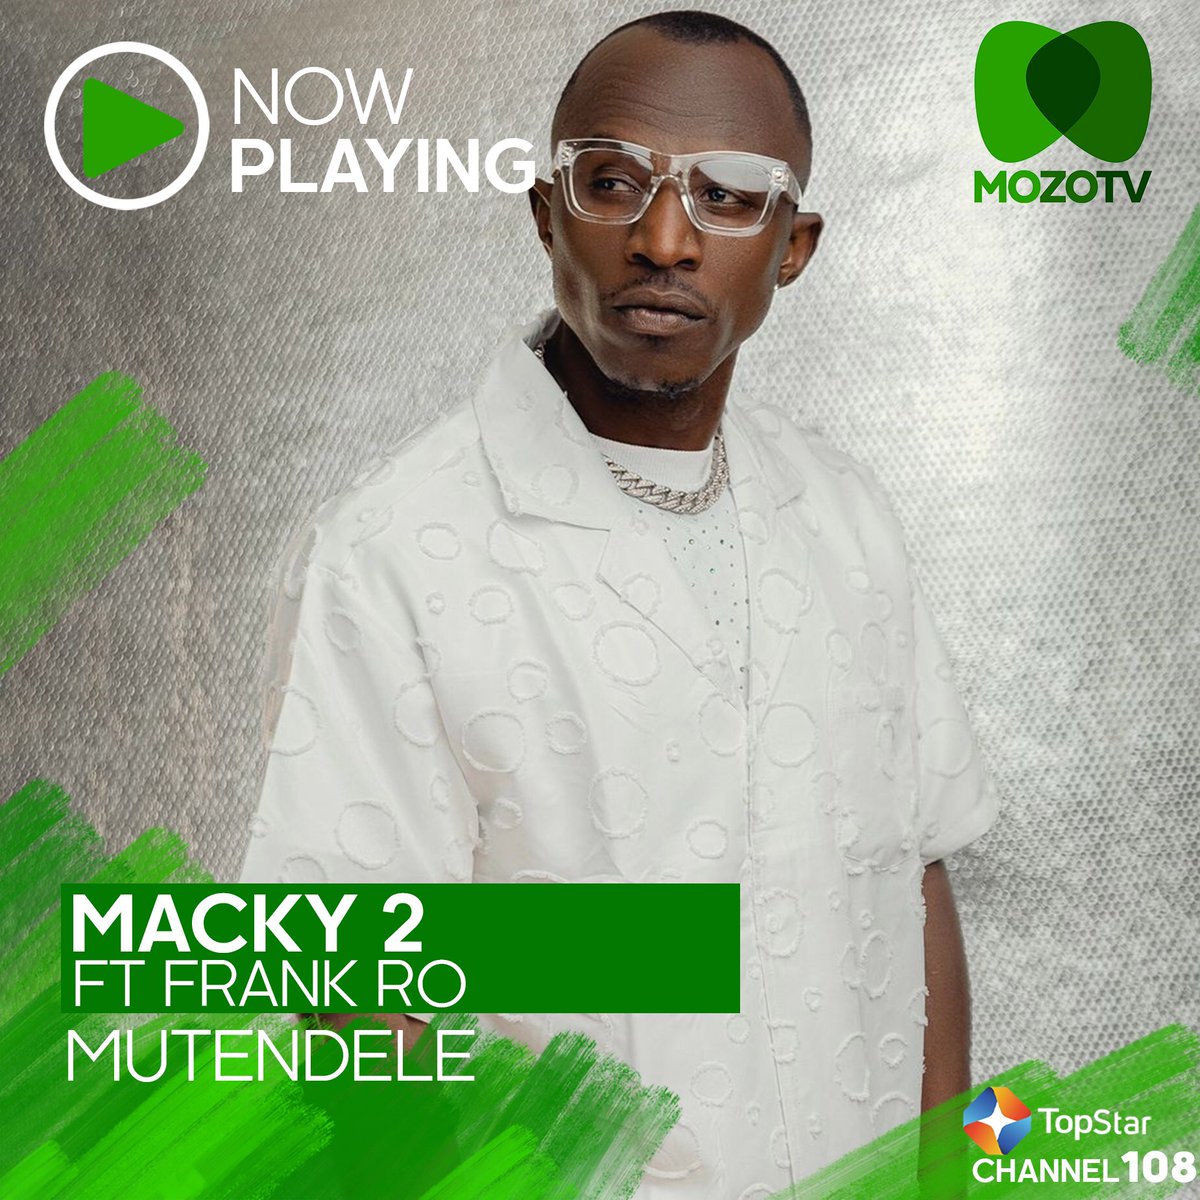 New Music, New vibes!💃🏽
 Macky 2 ft Frank Ro - Mutendele 💃 #NowPlaying 

Tune In Now! TopStar Channel 108 and 544 on DTH (Dish)💚
Also, install the Startimes APP via the link below 👇🏾:
play.google.com/store/apps/det…...  
@Macky2umupondo 

#ARefreshingExperience #NowPlaying